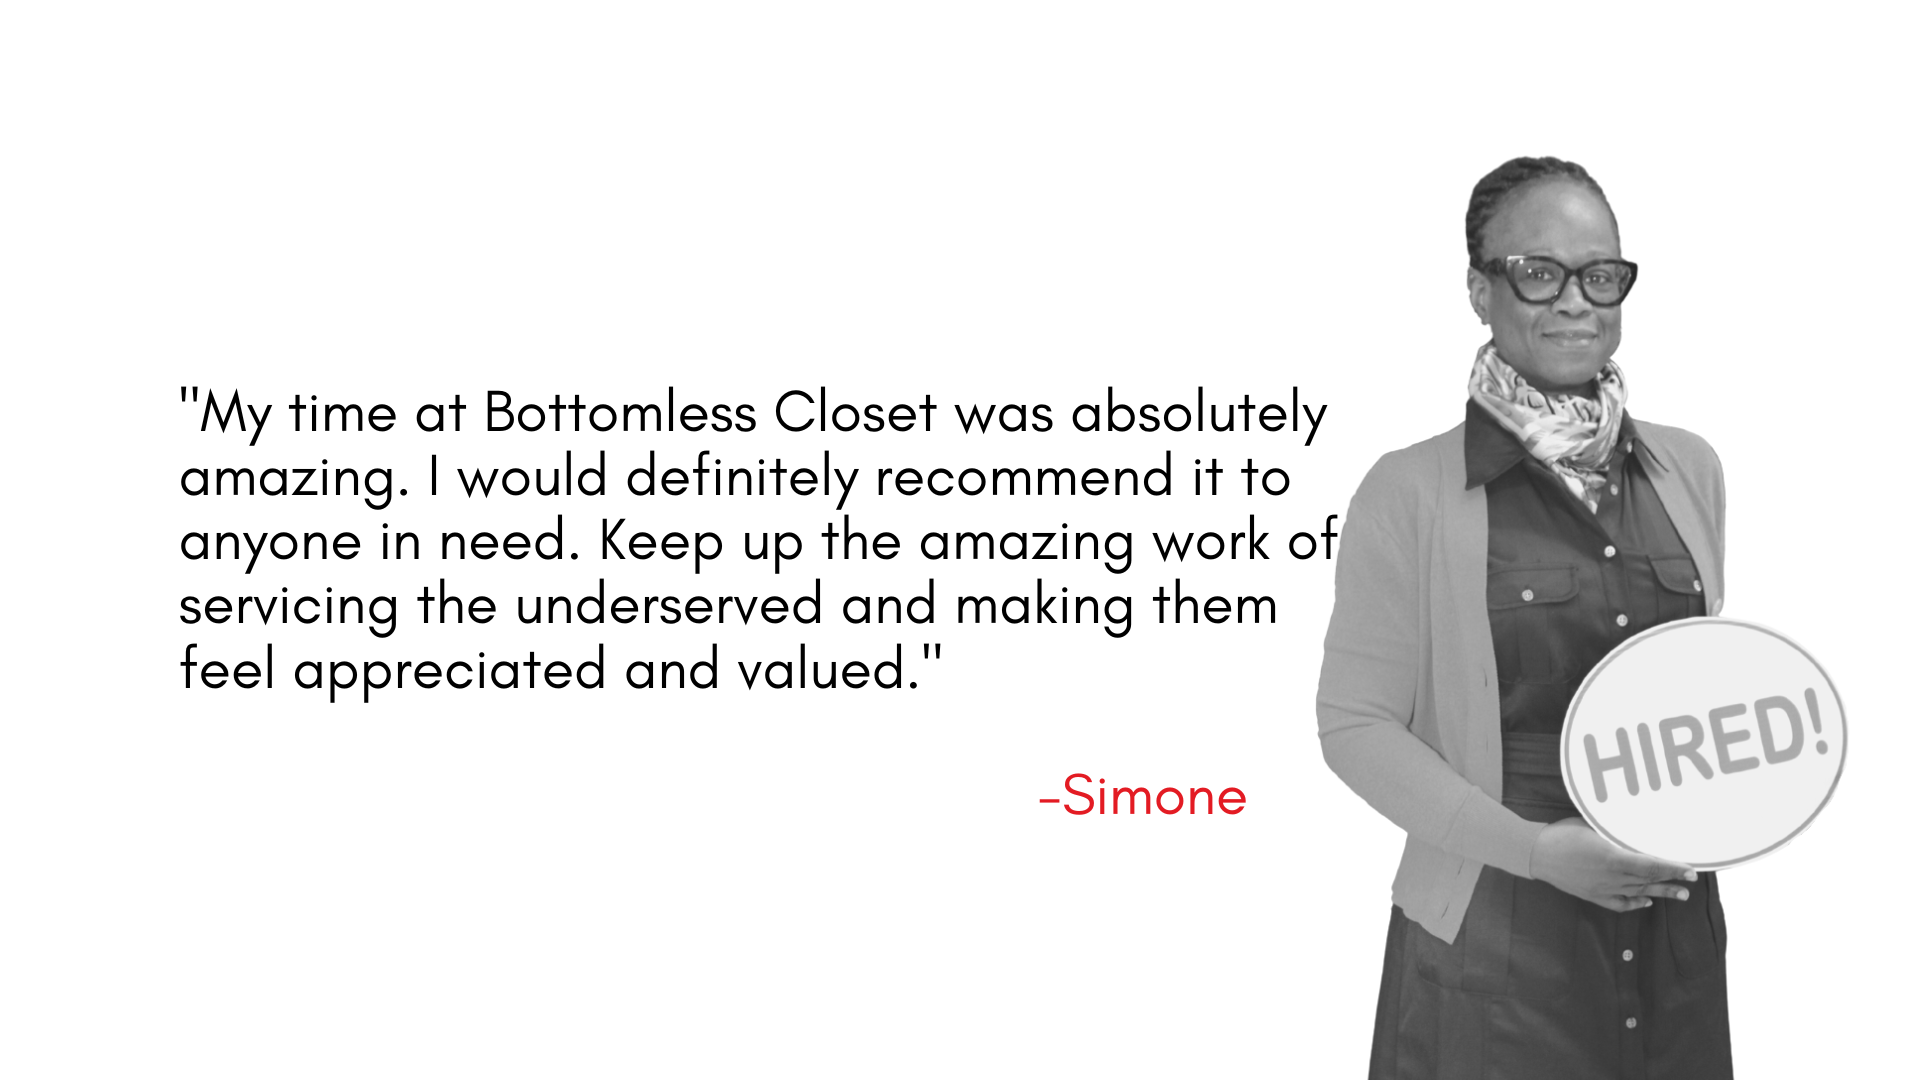 "My time at Bottomless Closet was absolutely amazing. I would definitely recommend it to anyone in need. Keep up the amazing work of servicing the underserved and making them feel appreciated and valued."